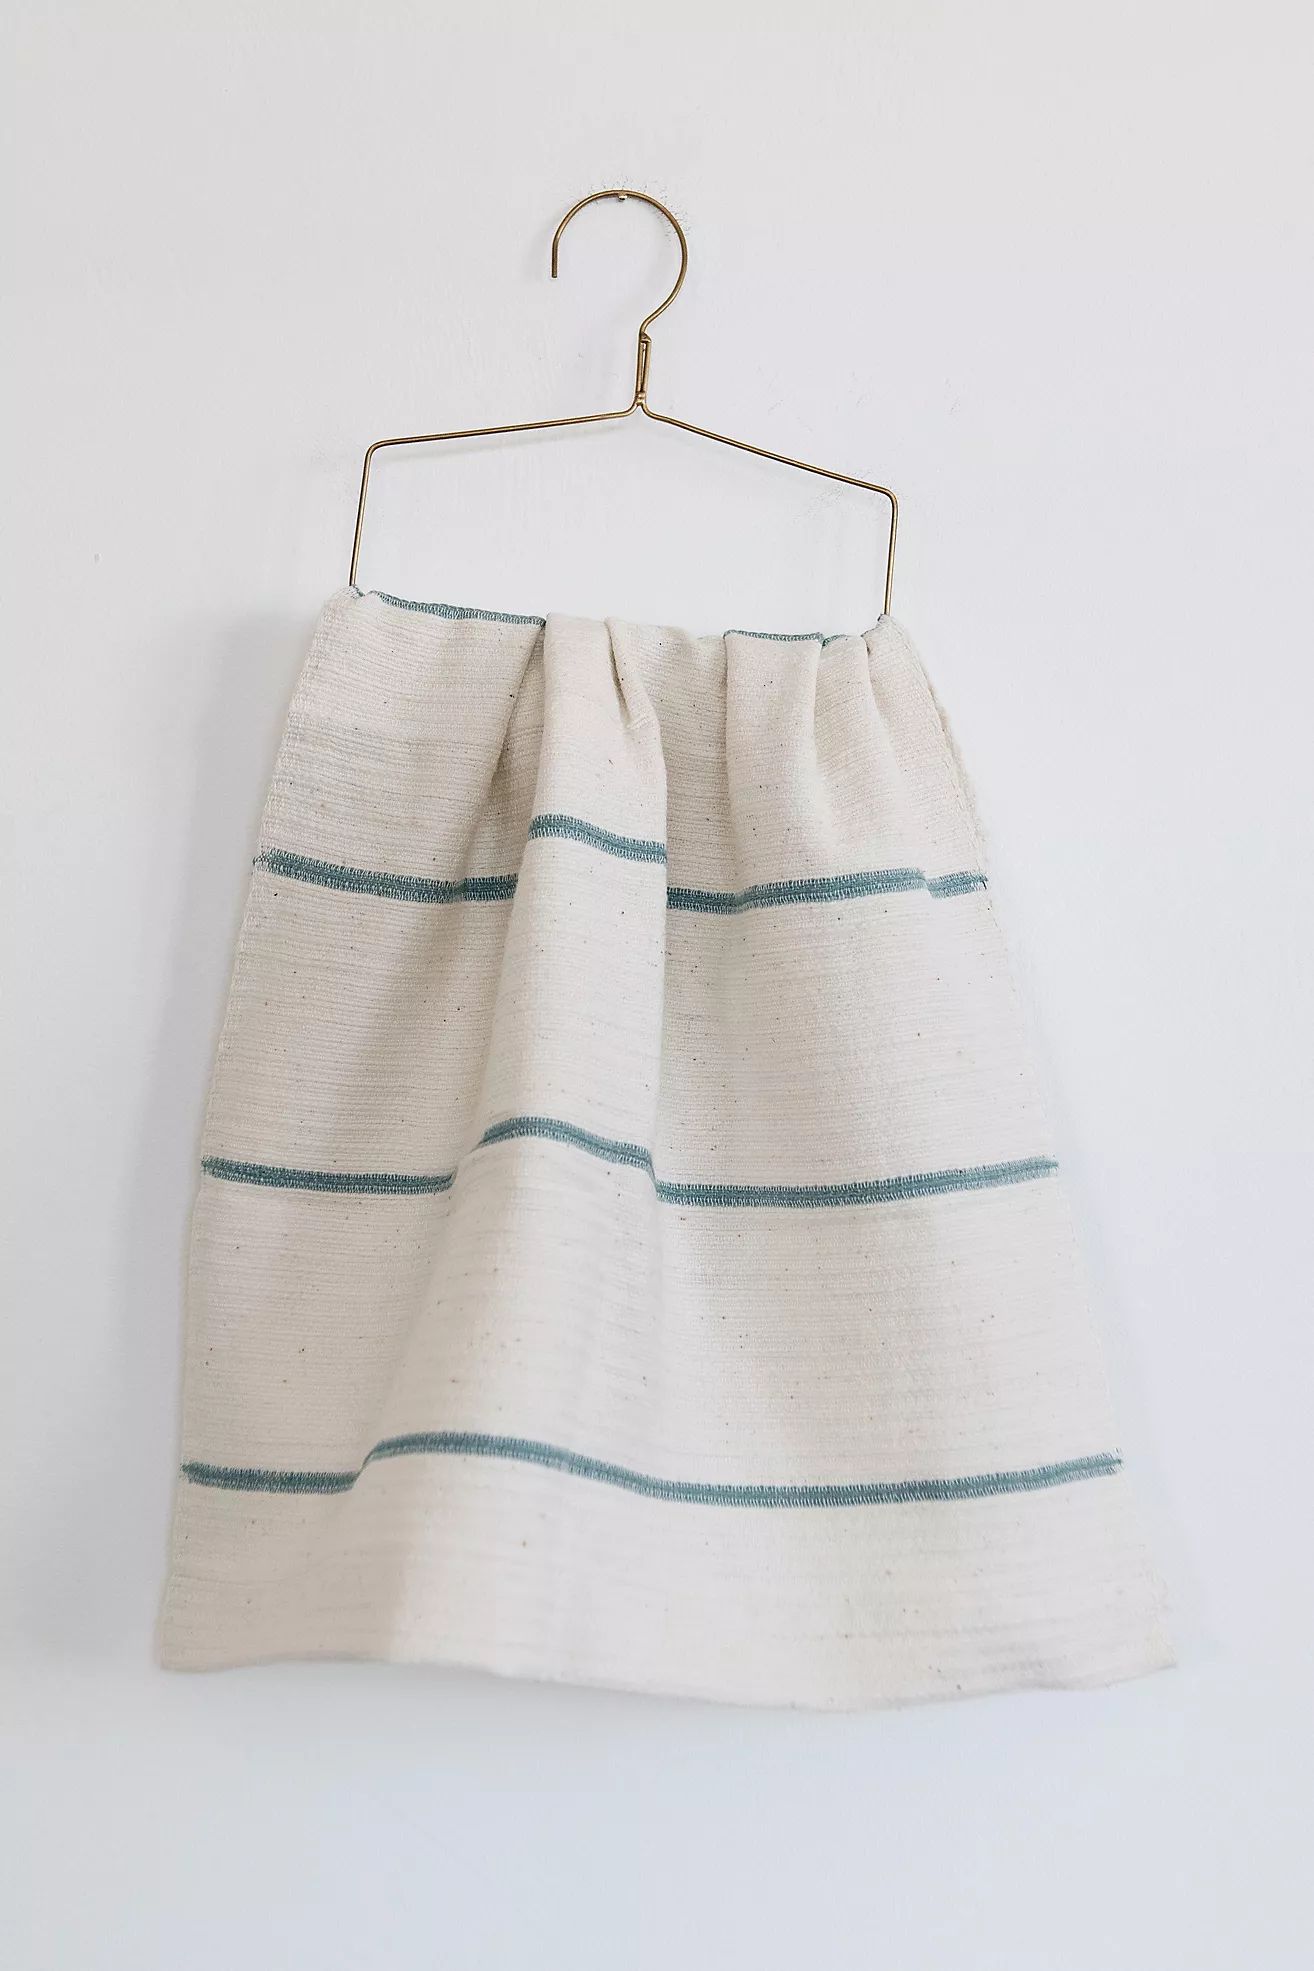 Connected Goods Izzy Hand Towel No. 0932 | Anthropologie (US)